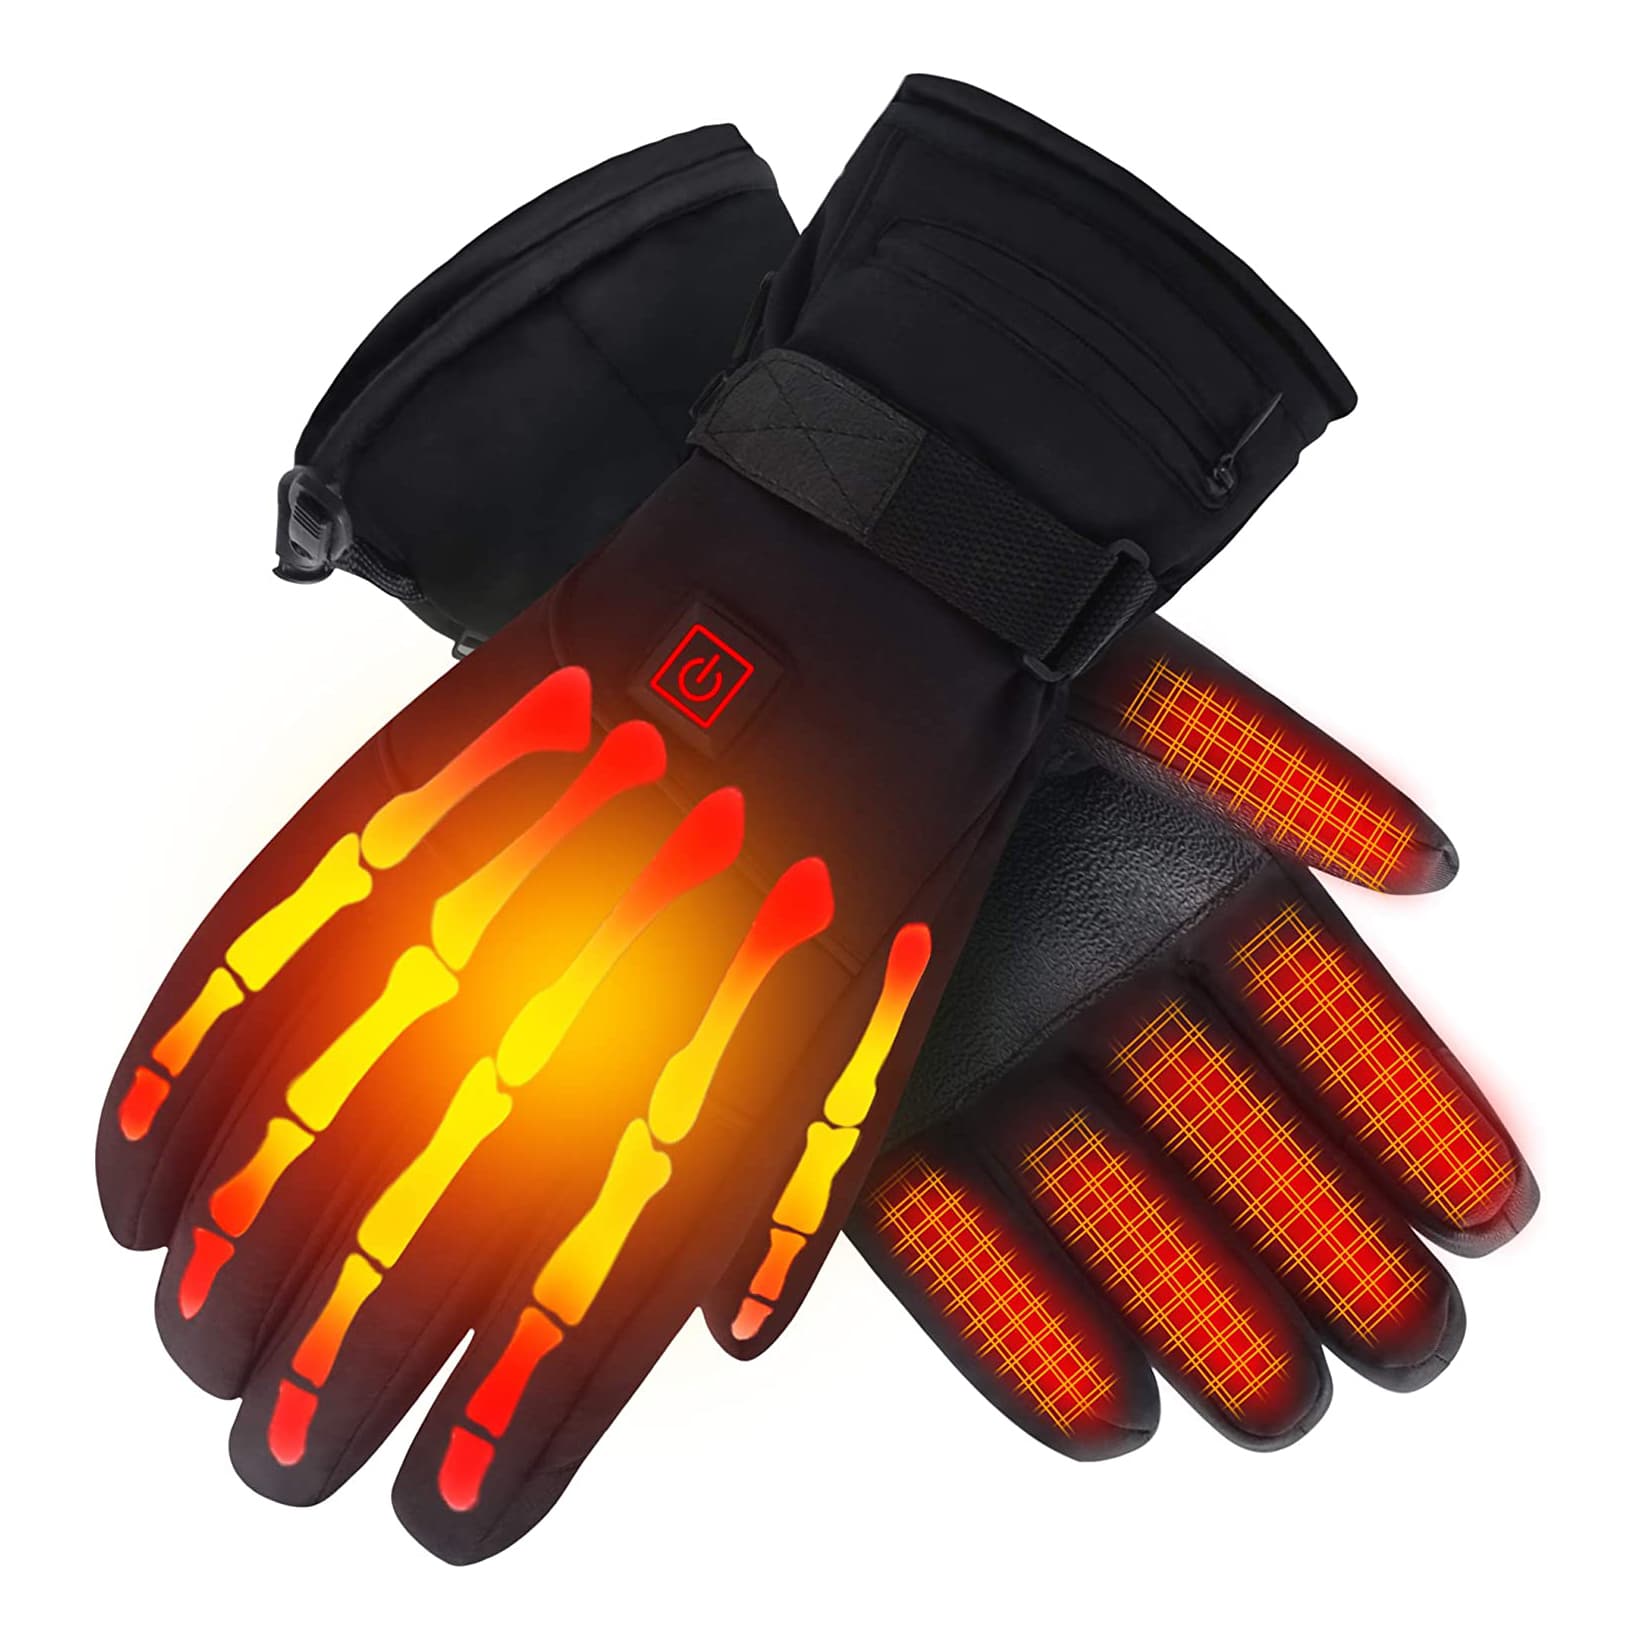 Top 10 Best Electric Heated Gloves in 2022 Reviews | Buyer's Guide